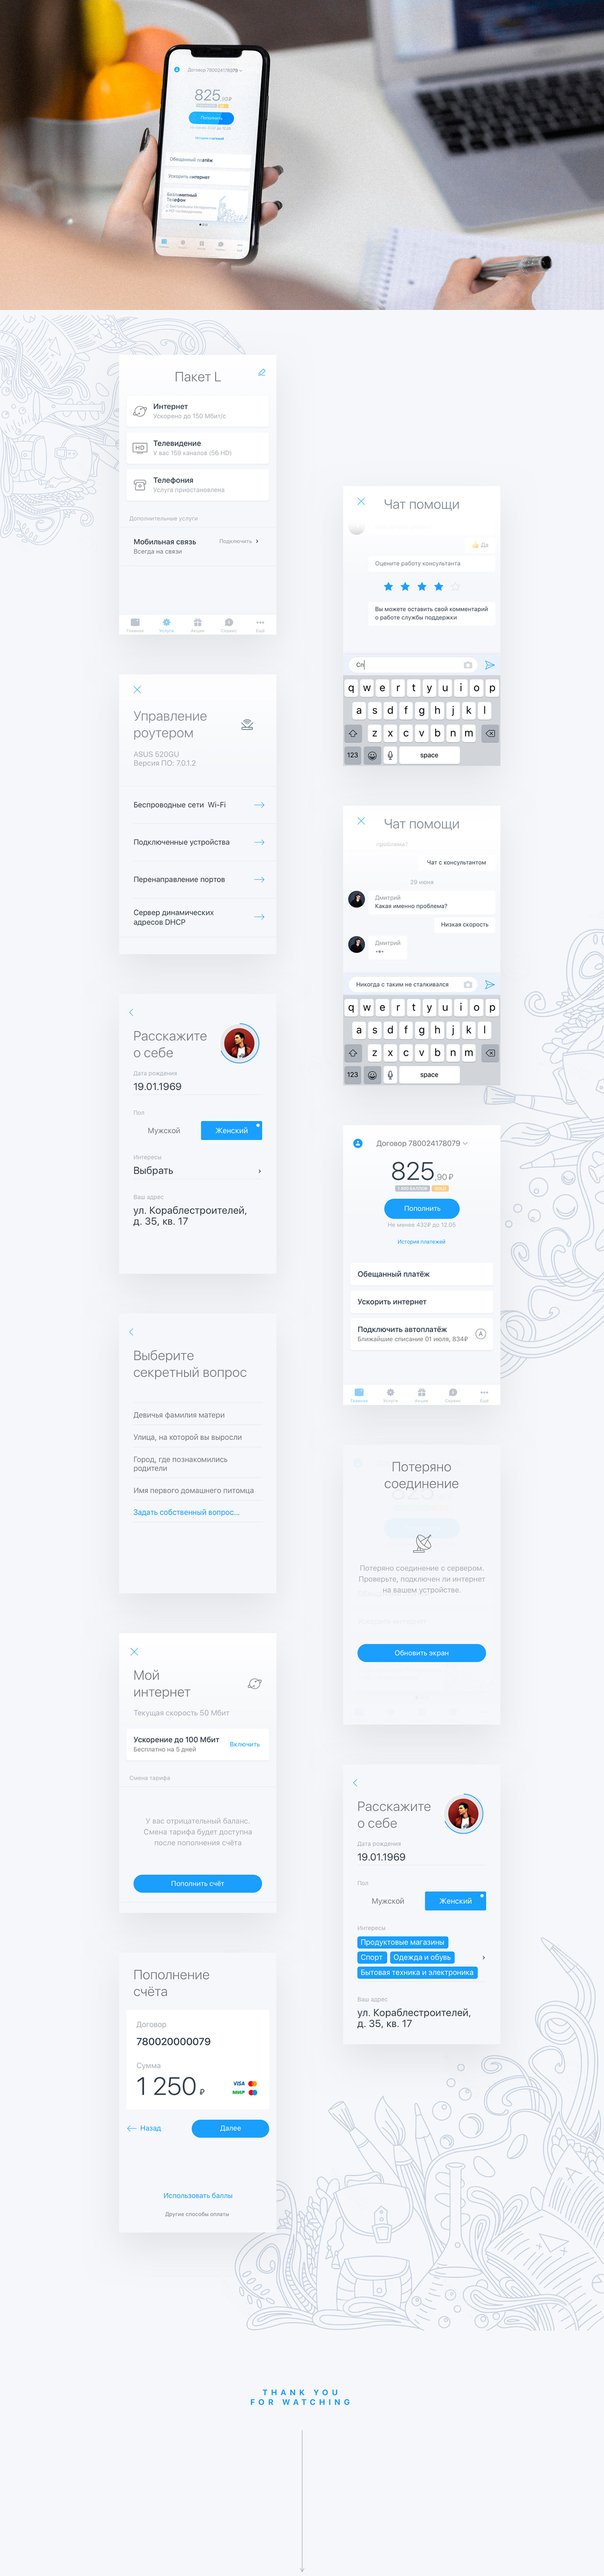 ios android app mobile UI ux Interface interaction motion blue